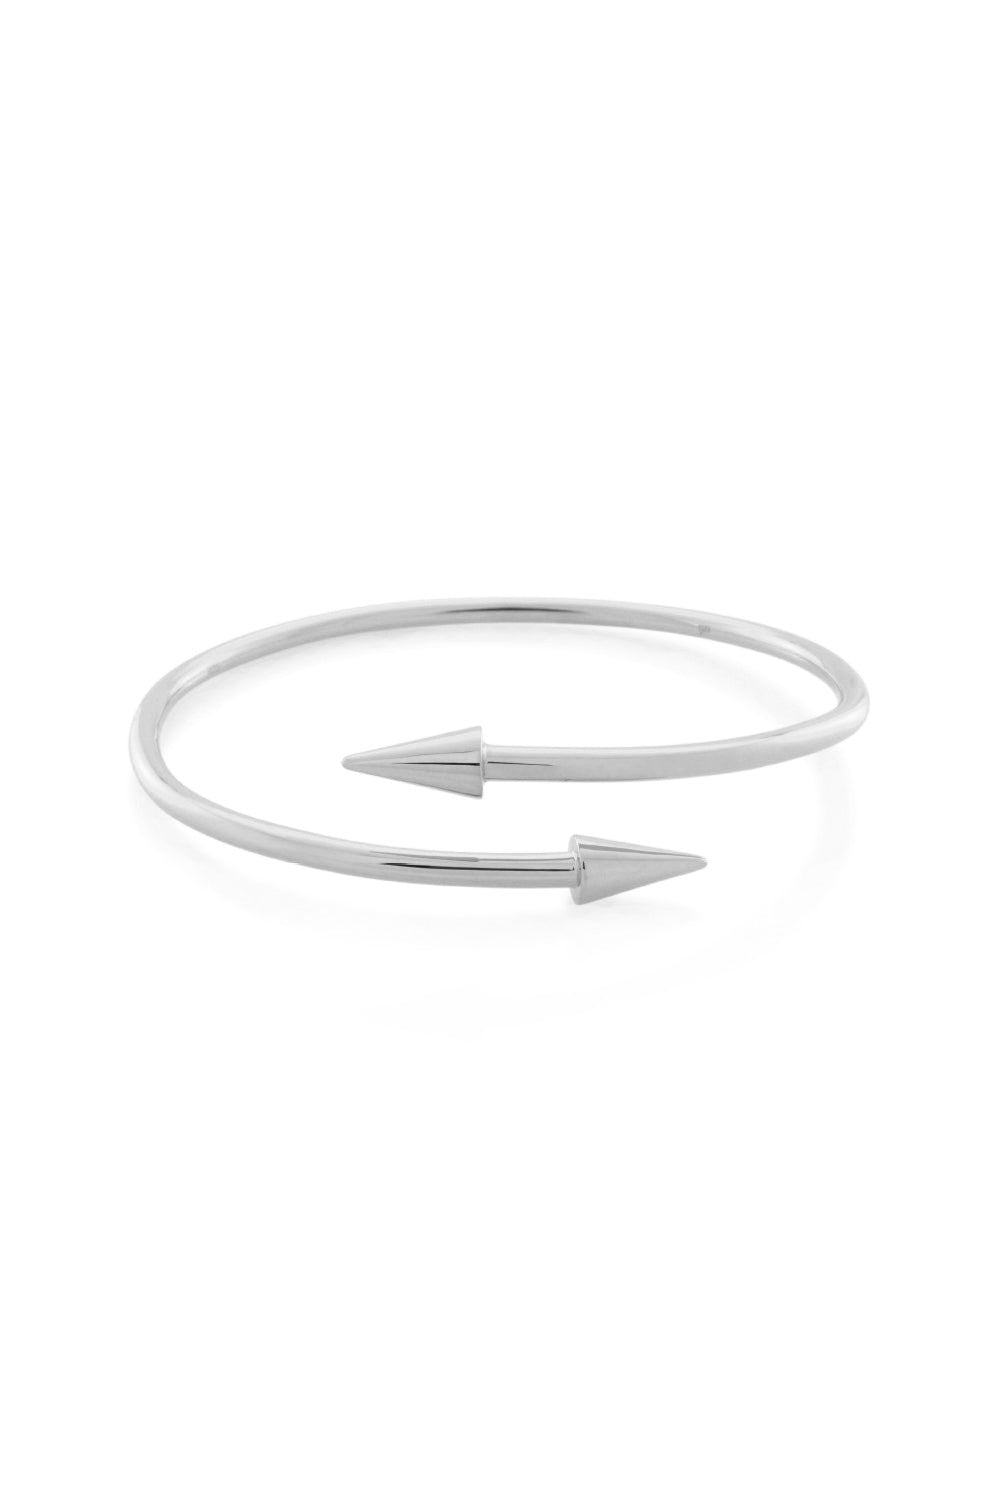 SENER BESIM ACCESSORIES SILVER TWO POINT TUBE BANGLE SILVER